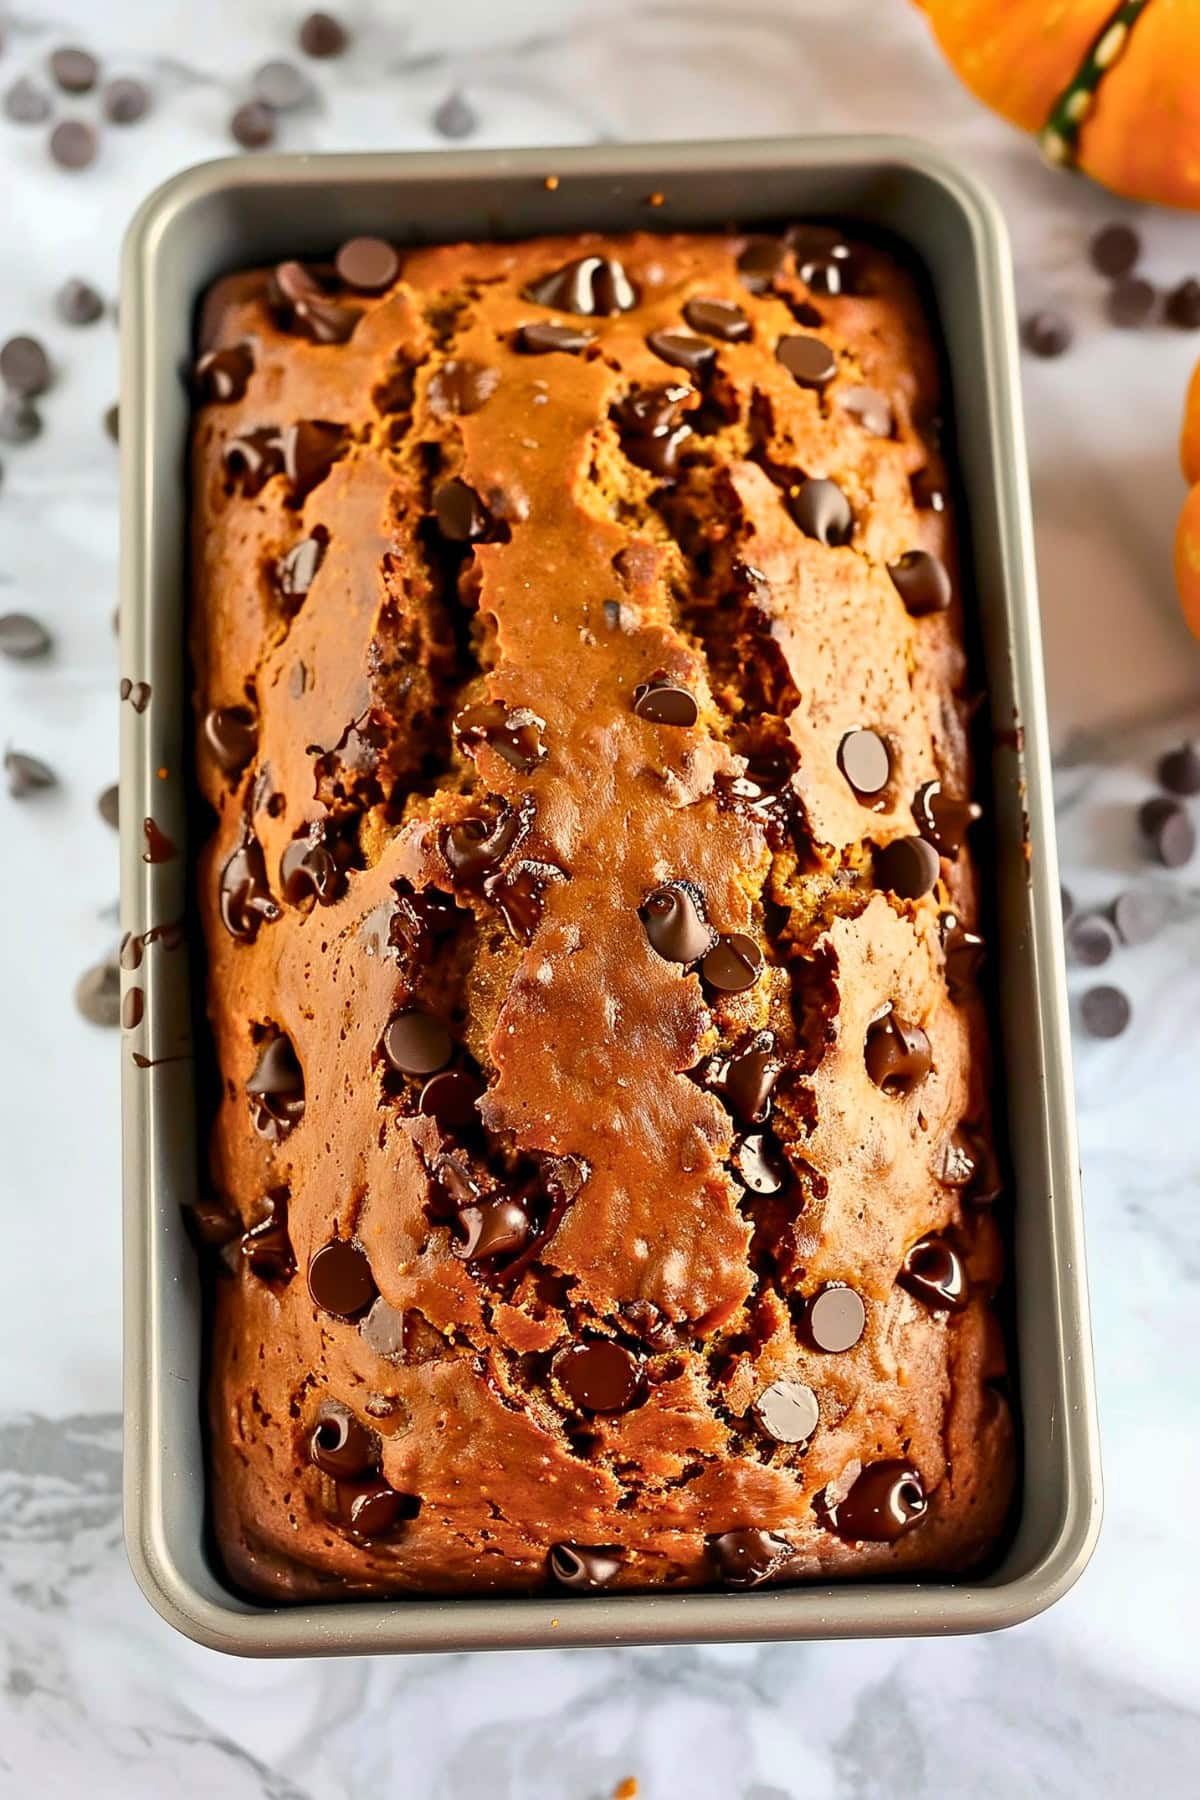 Top View Baked Pumpkin Chocolate Chip Bread Still in the Loaf Pan on a White Marble Table